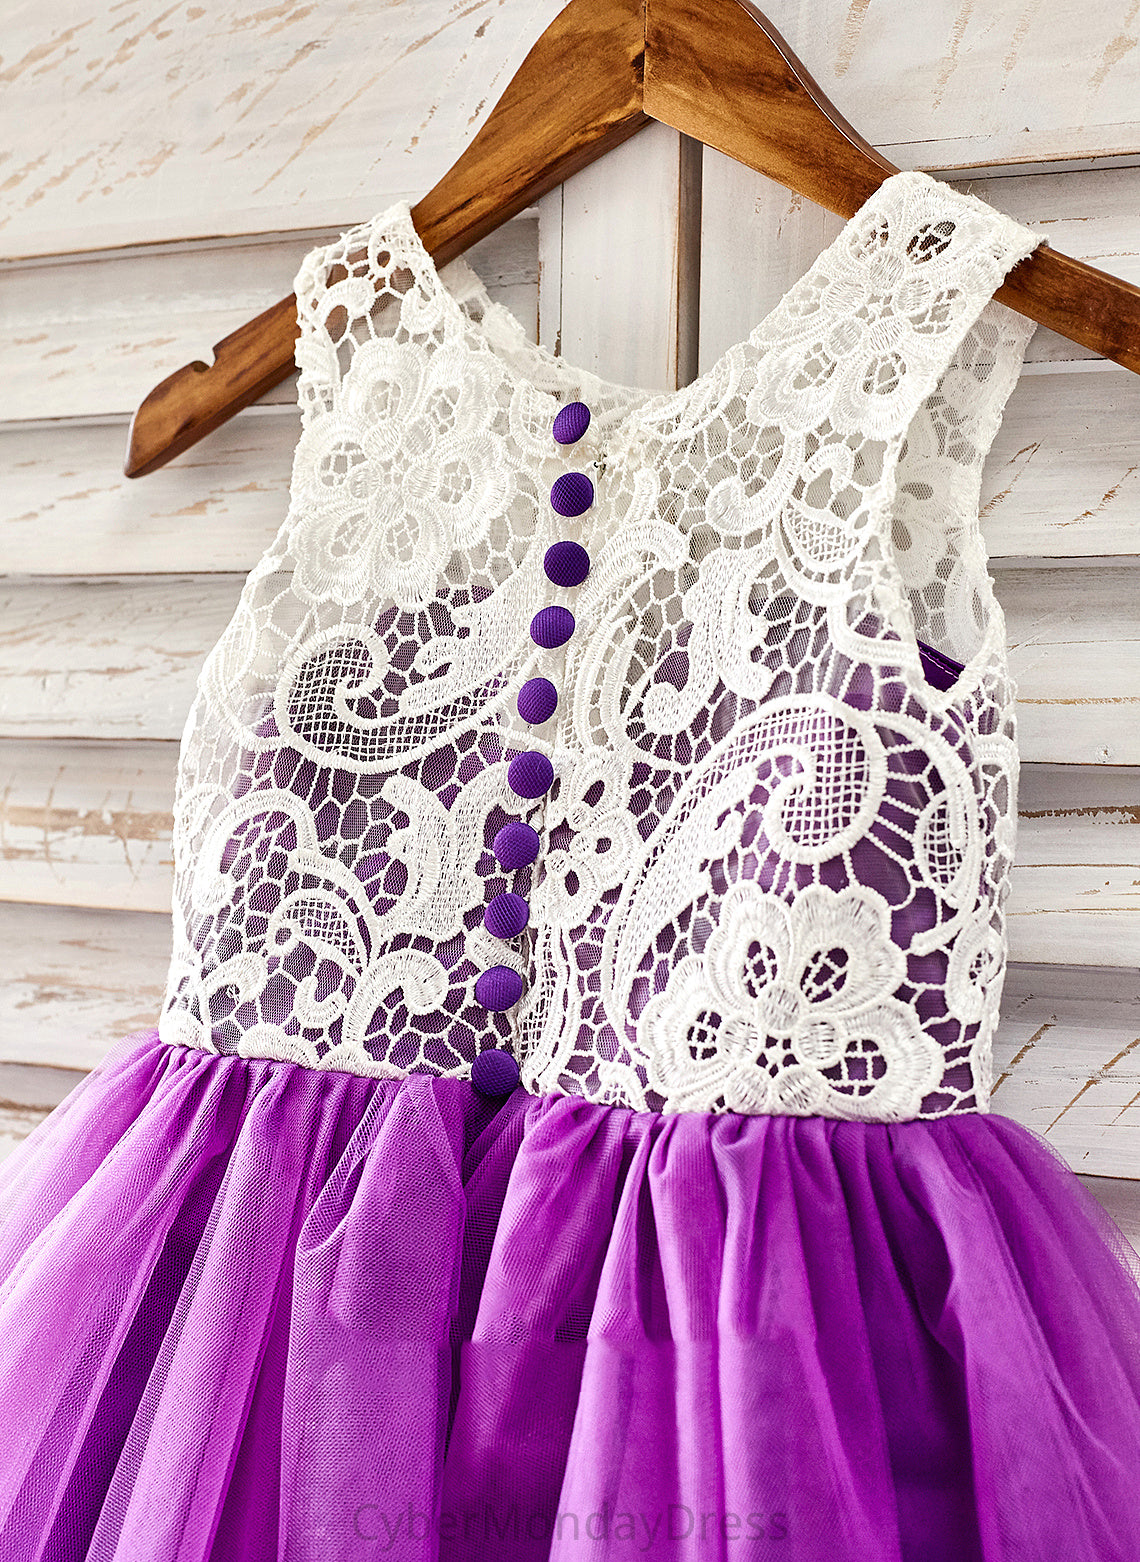 Scoop Neck With Tulle Dress A-Line Tracy Lace Flower Girl Dresses Girl - Knee-length Flower Sleeveless